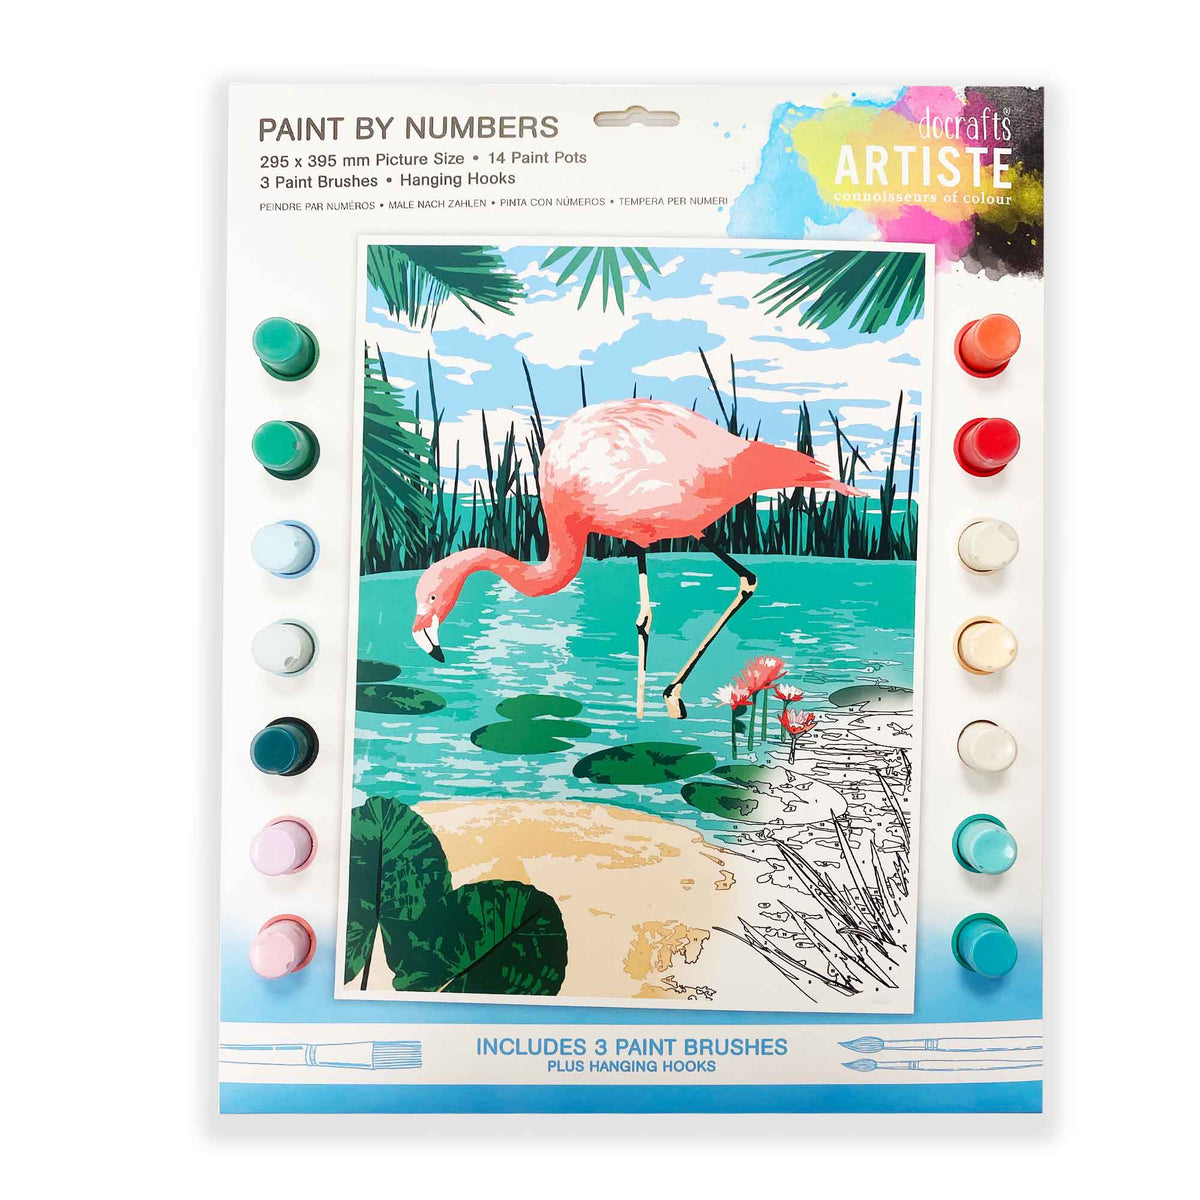 Docrafts Artiste Paint by Numbers (295 x 395mm) Tropical Flamingo